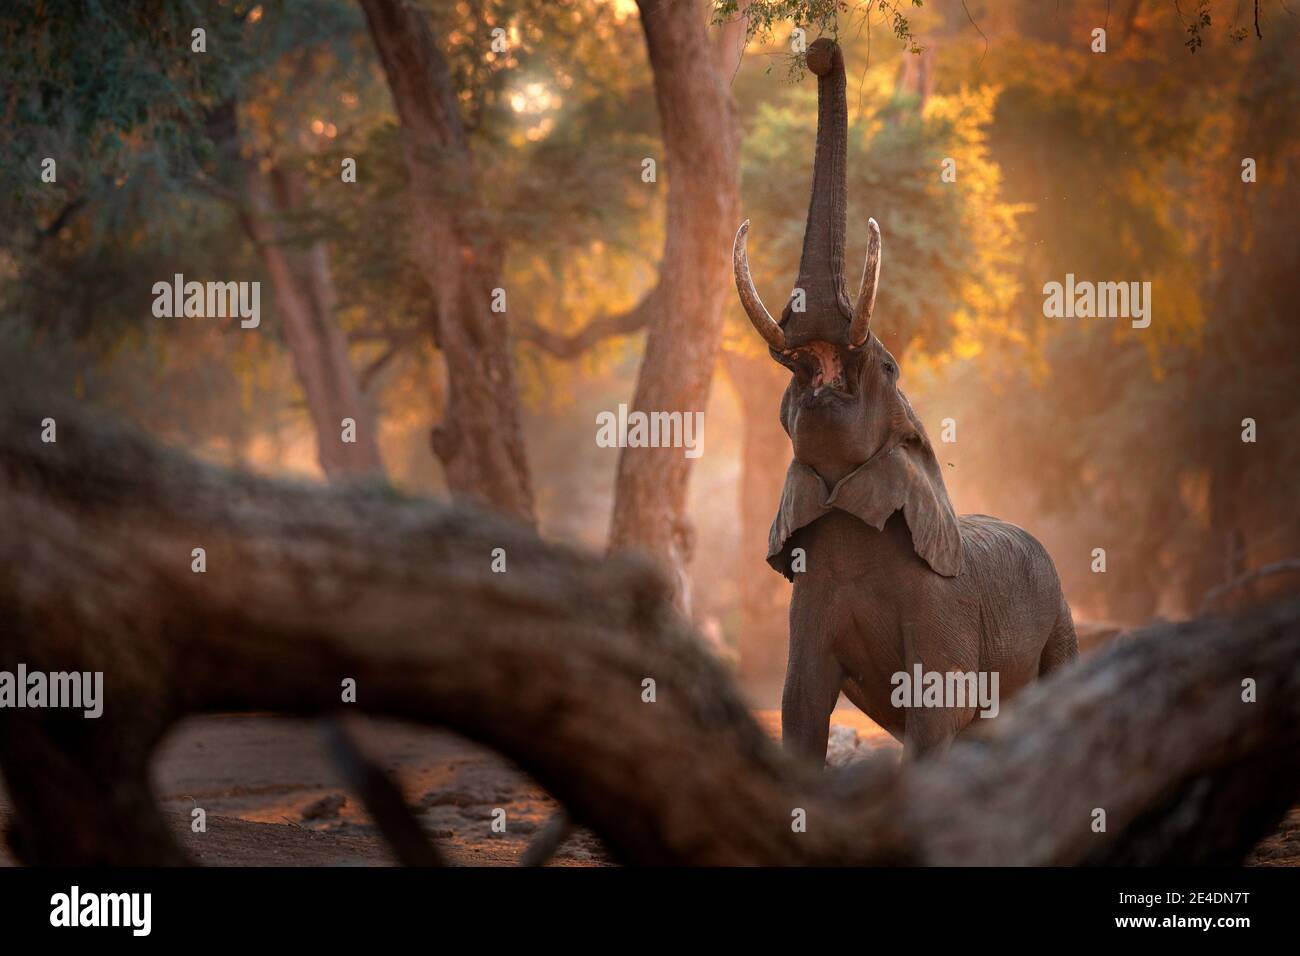 Elephant at Mana Pools NP, Zimbabwe in Africa. Big animal in the old forest. evening light, sun set. Magic wildlife scene in nature. African elephant Stock Photo